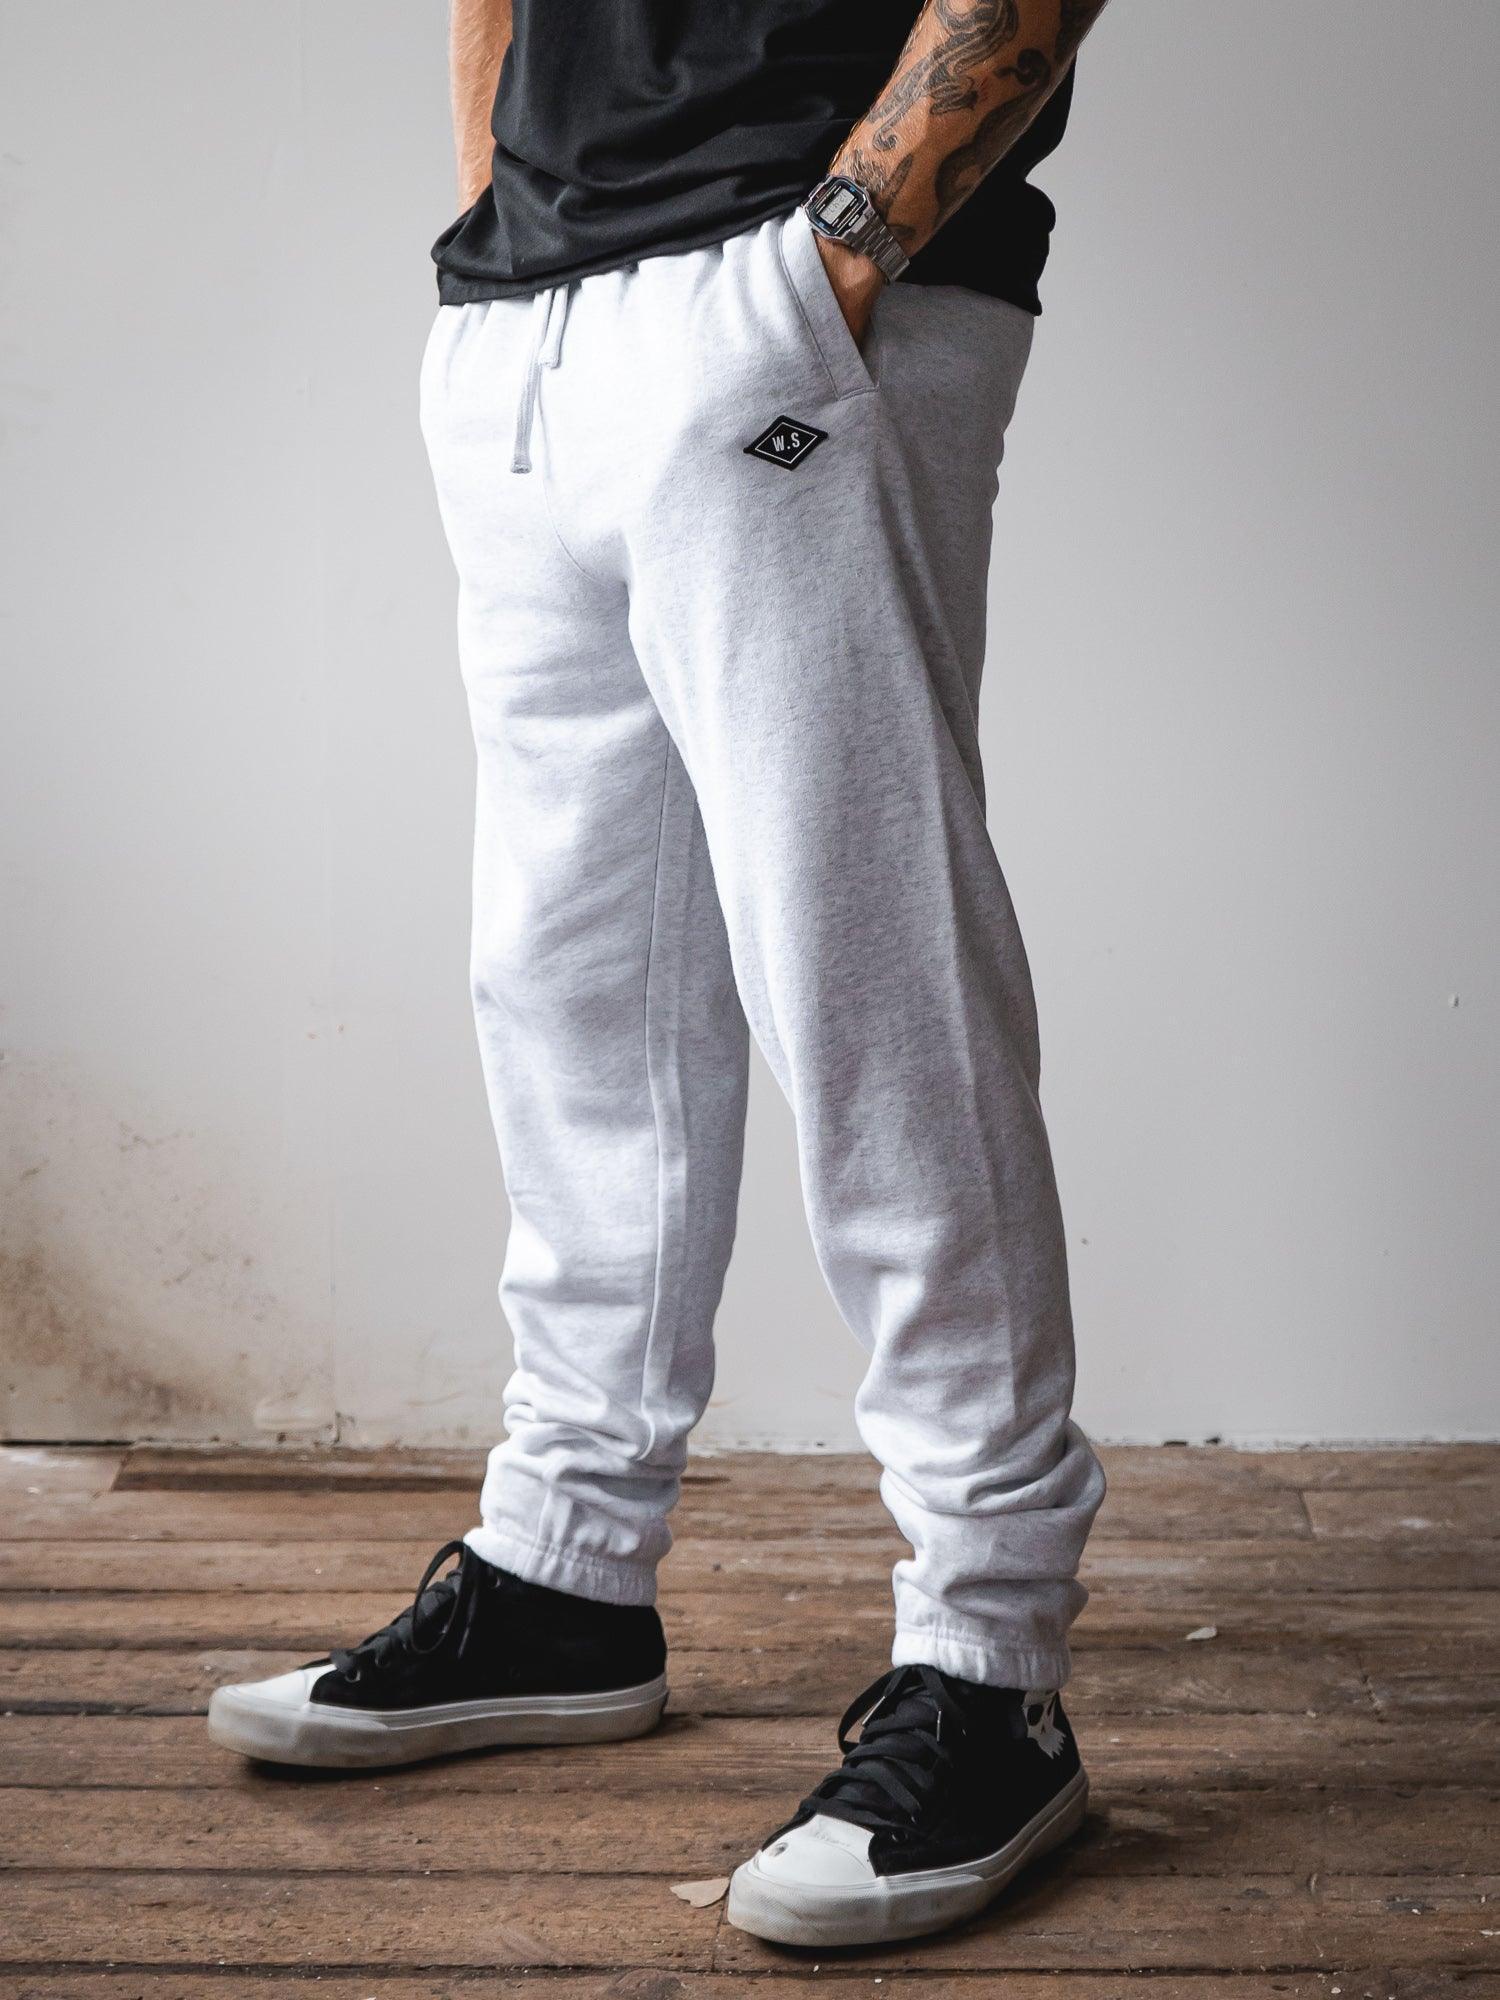 mens watershed joggers - classic mens joggers grey - uk surf brand - newquay cornwall